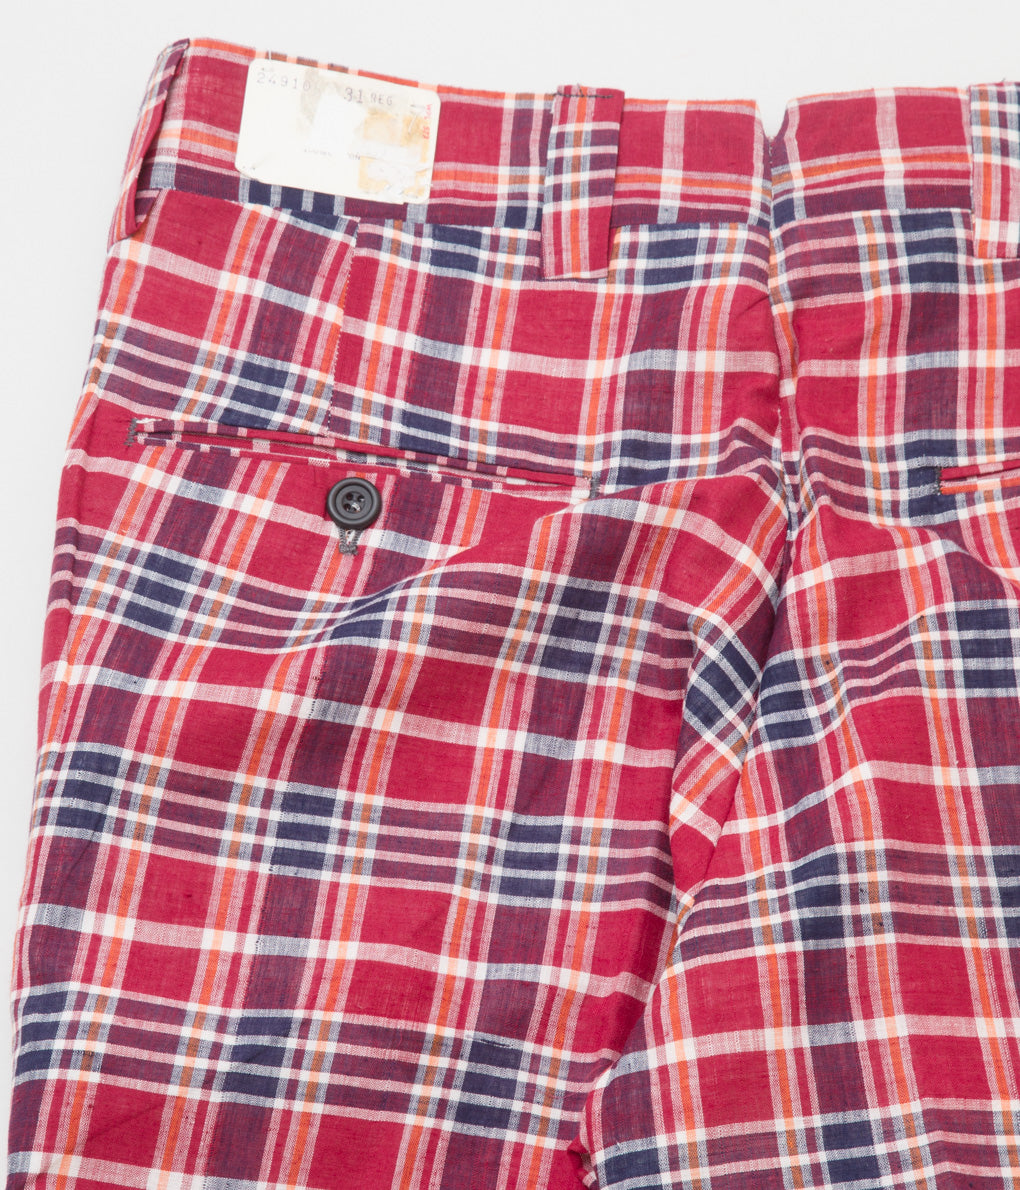 VINTAGE "O'CONNELLS LUCAS-CHELF AUTHENTIC MADRAS CHECK TROUSER" (RED CHECK)